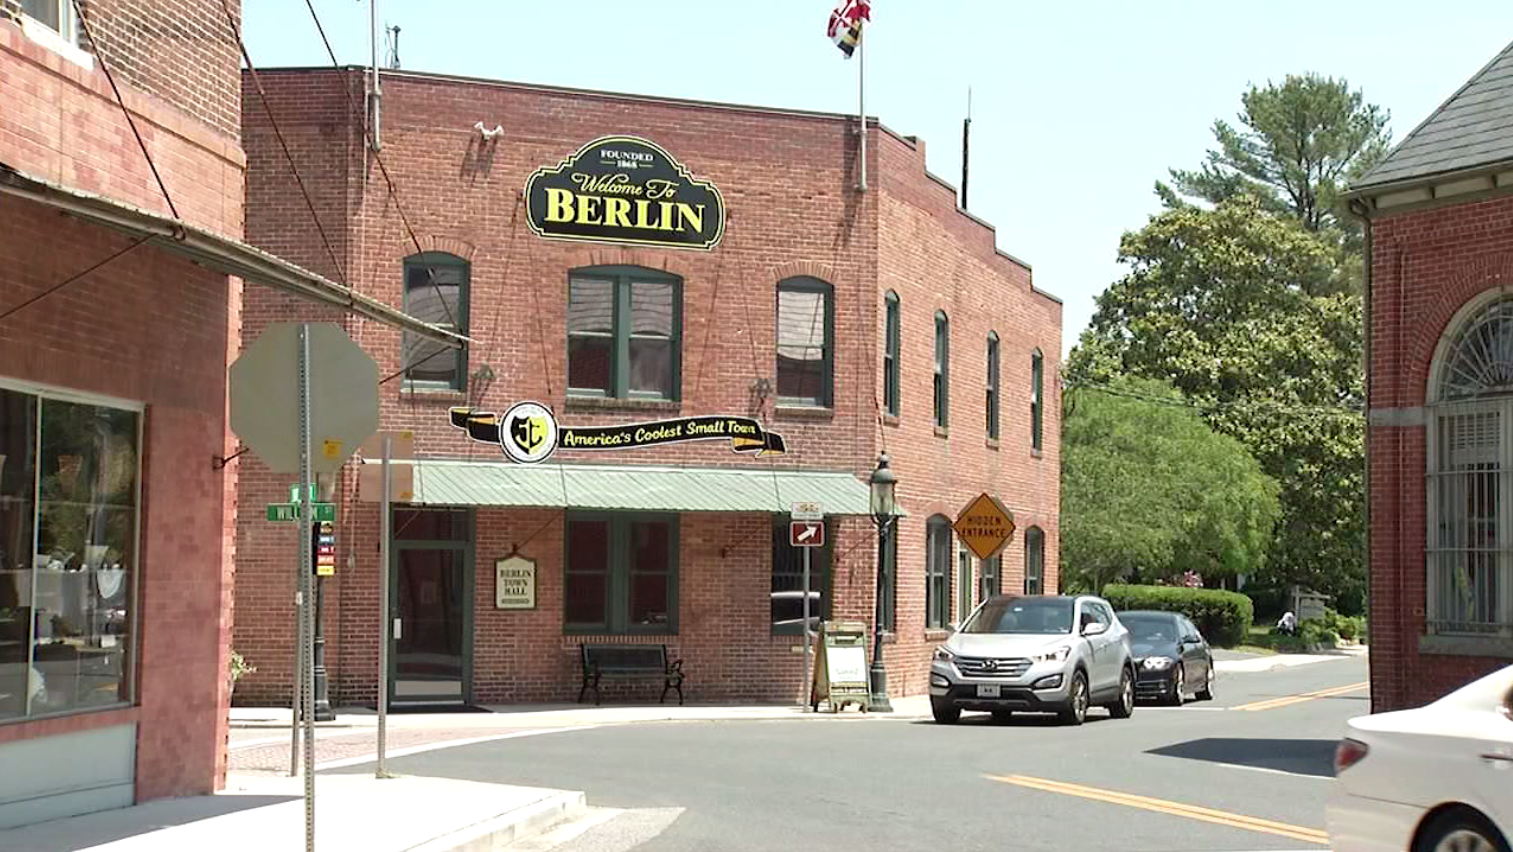 Results are in for the town of Berlin's 2020 Municipal Election